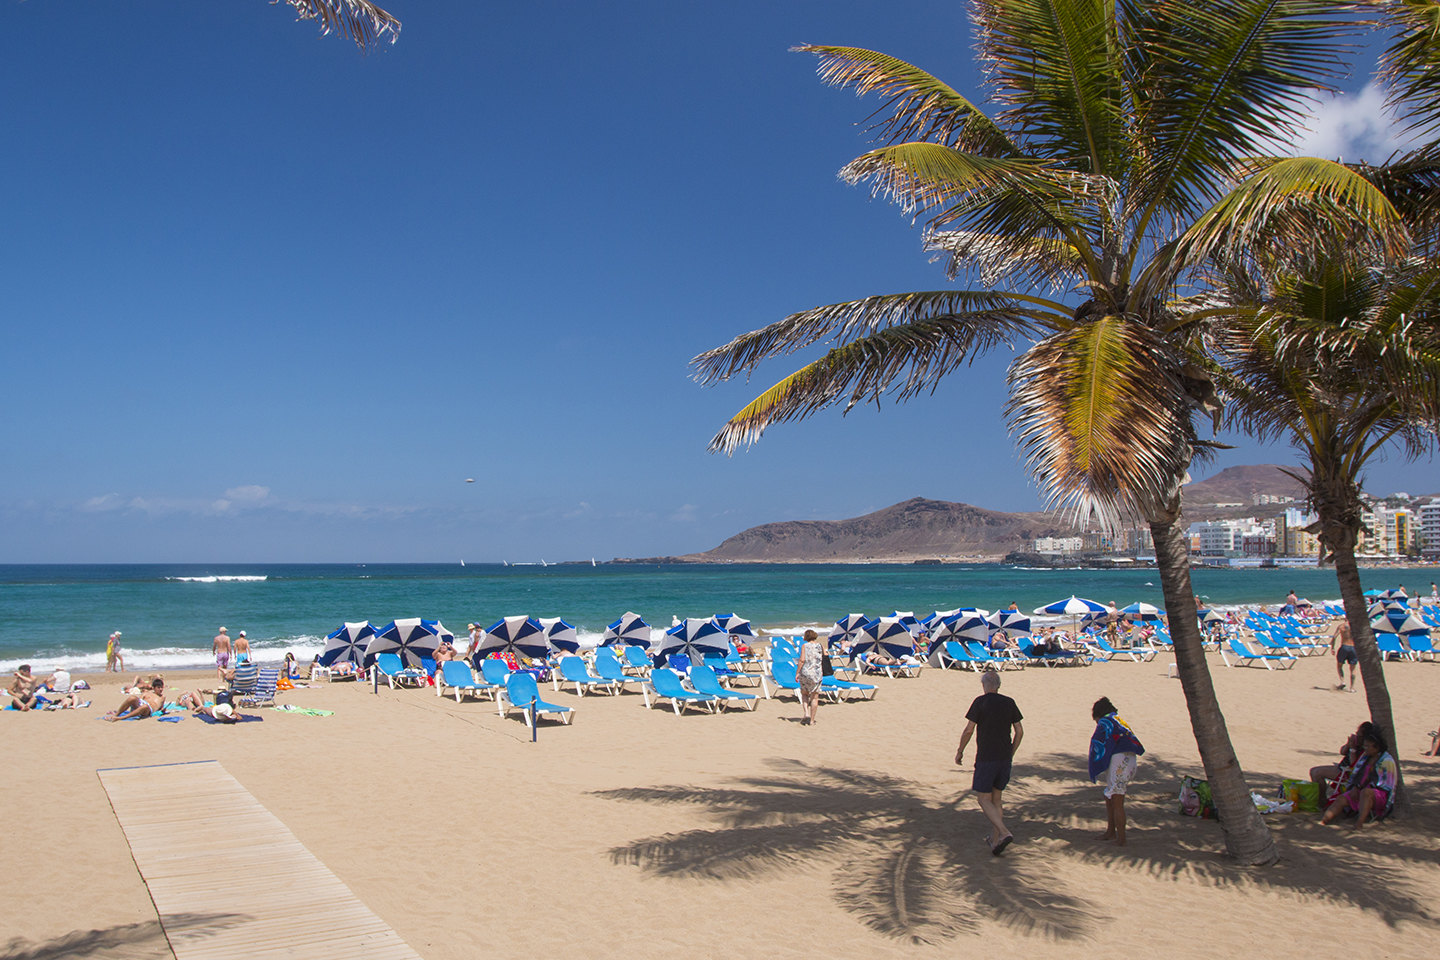 Sitting in the shade of Las Canteras' coconut palm trees